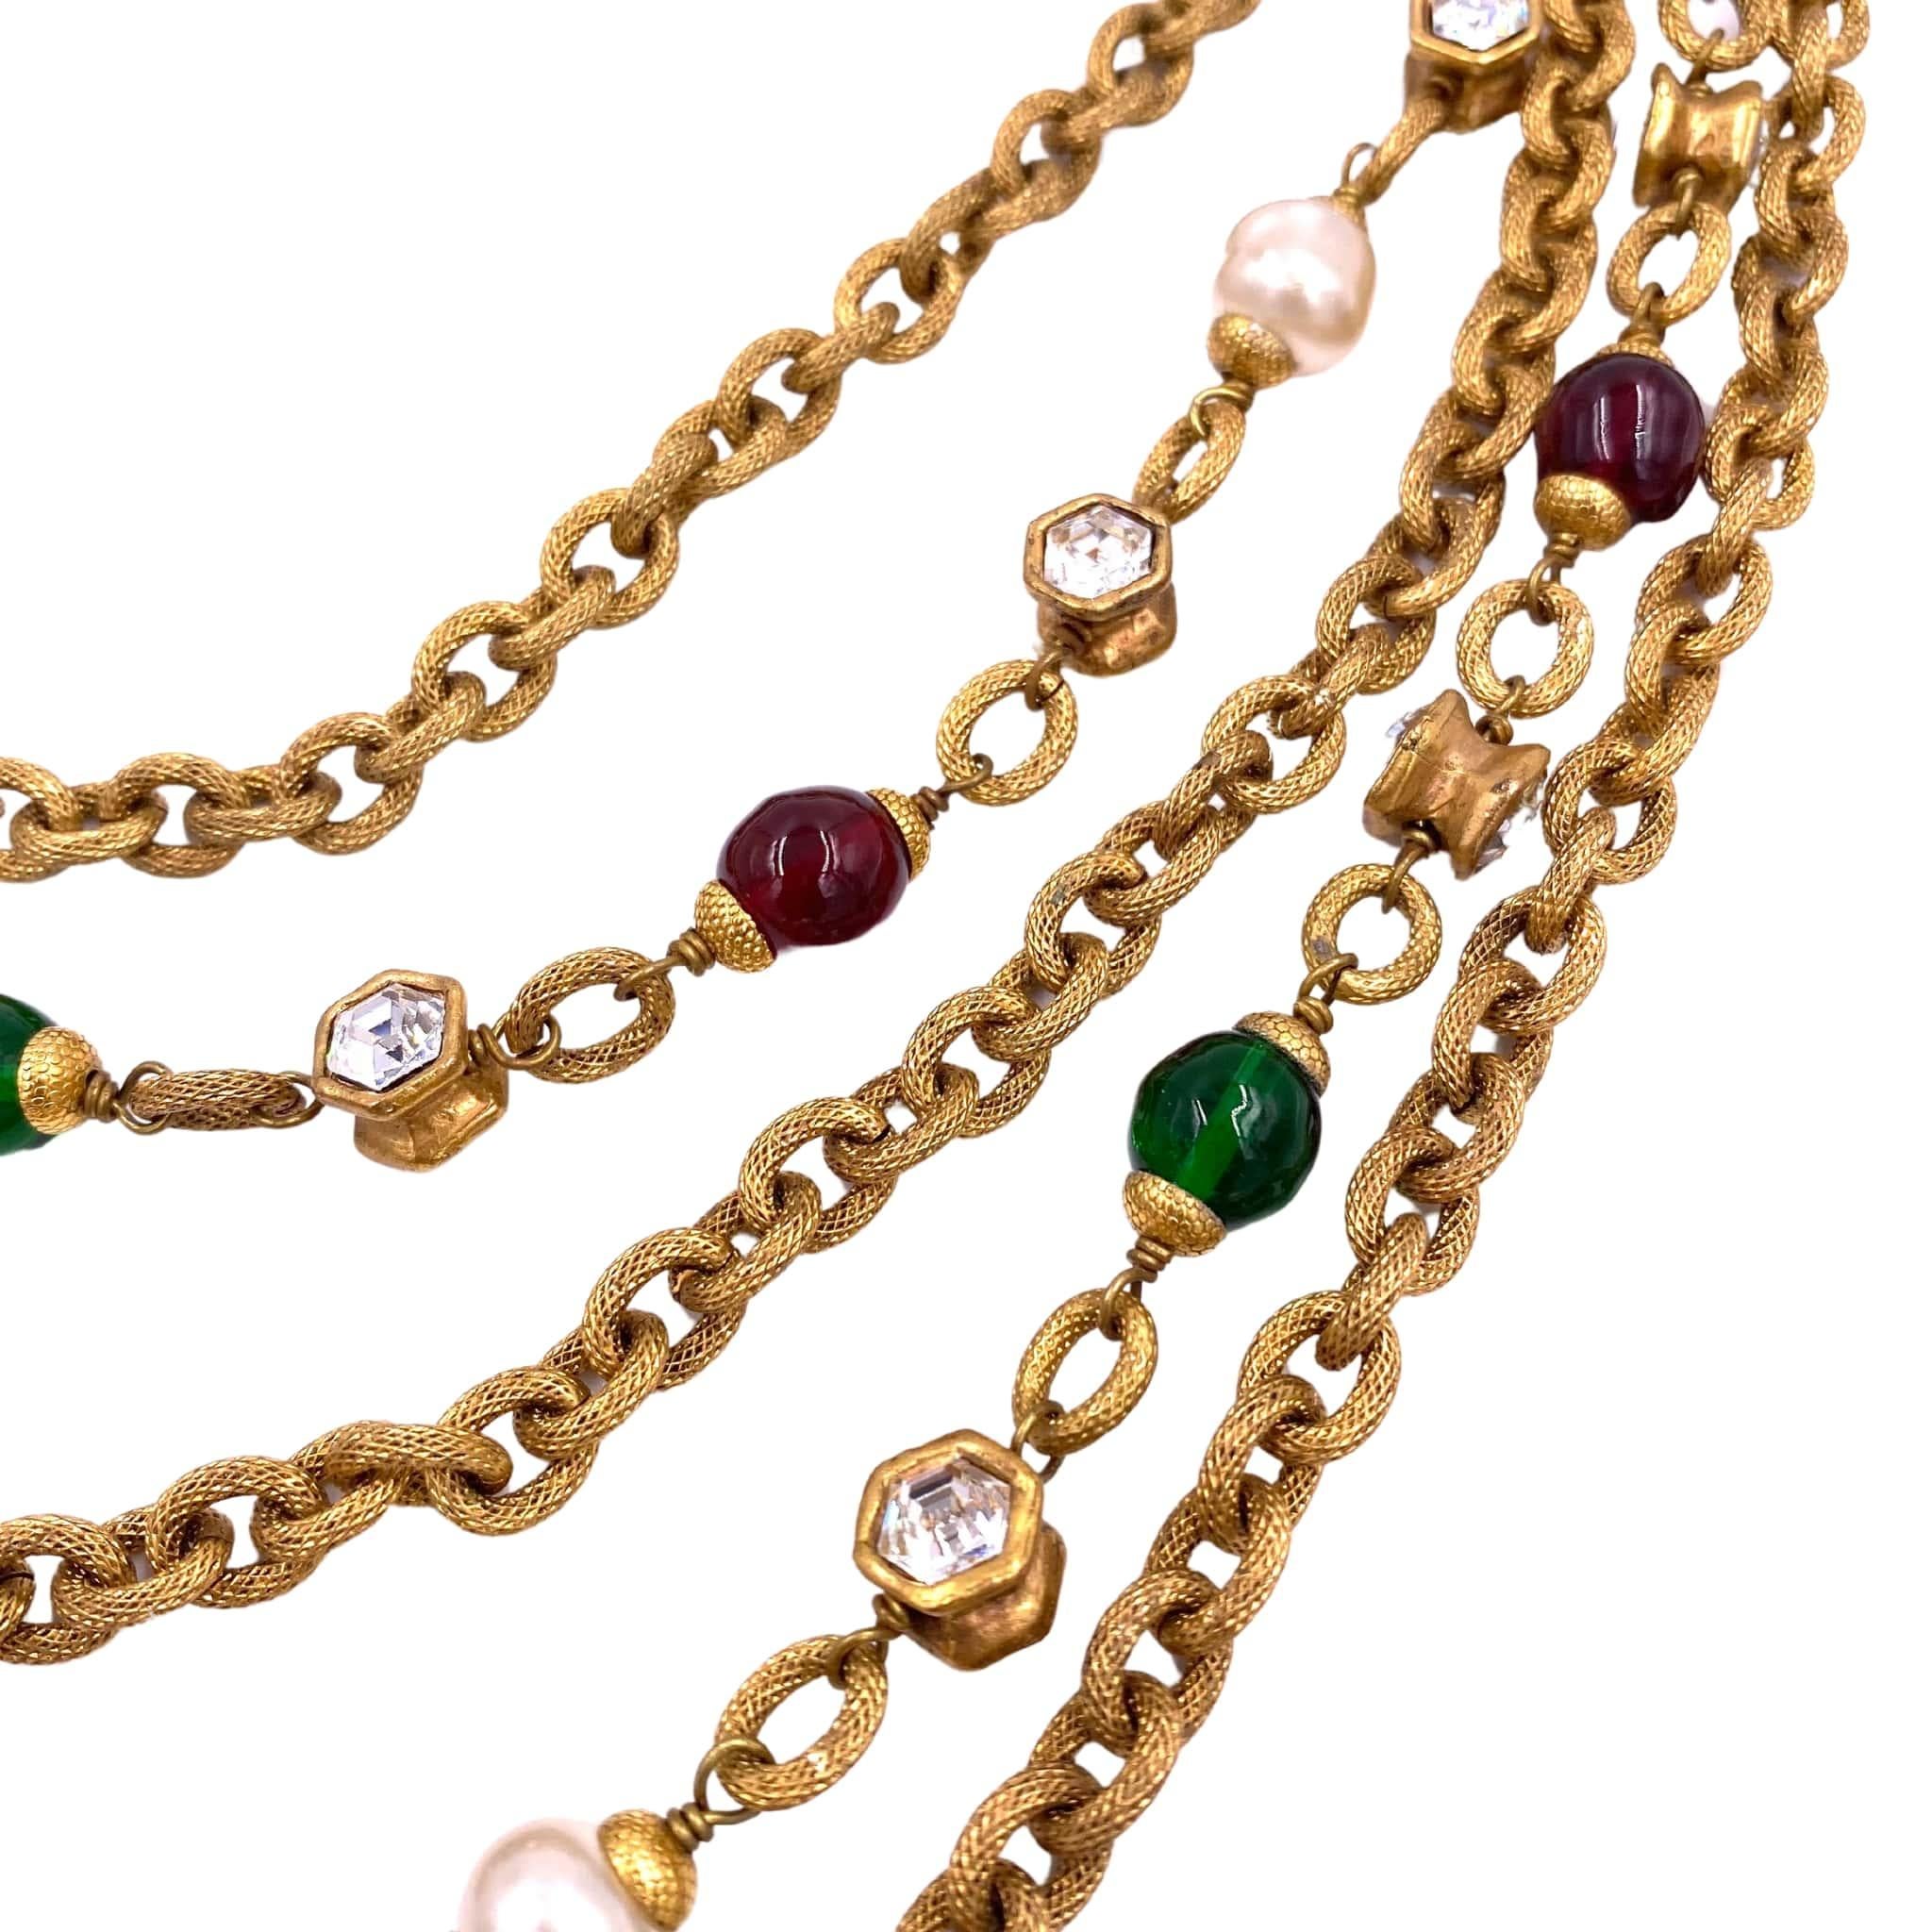 Experience timeless elegance with the Chanel 1984 Multi Chain Necklace. Featuring layers of green and purple stones, this necklace adds a touch of sophistication to any outfit. Elevate your style and make a statement with this iconic piece from